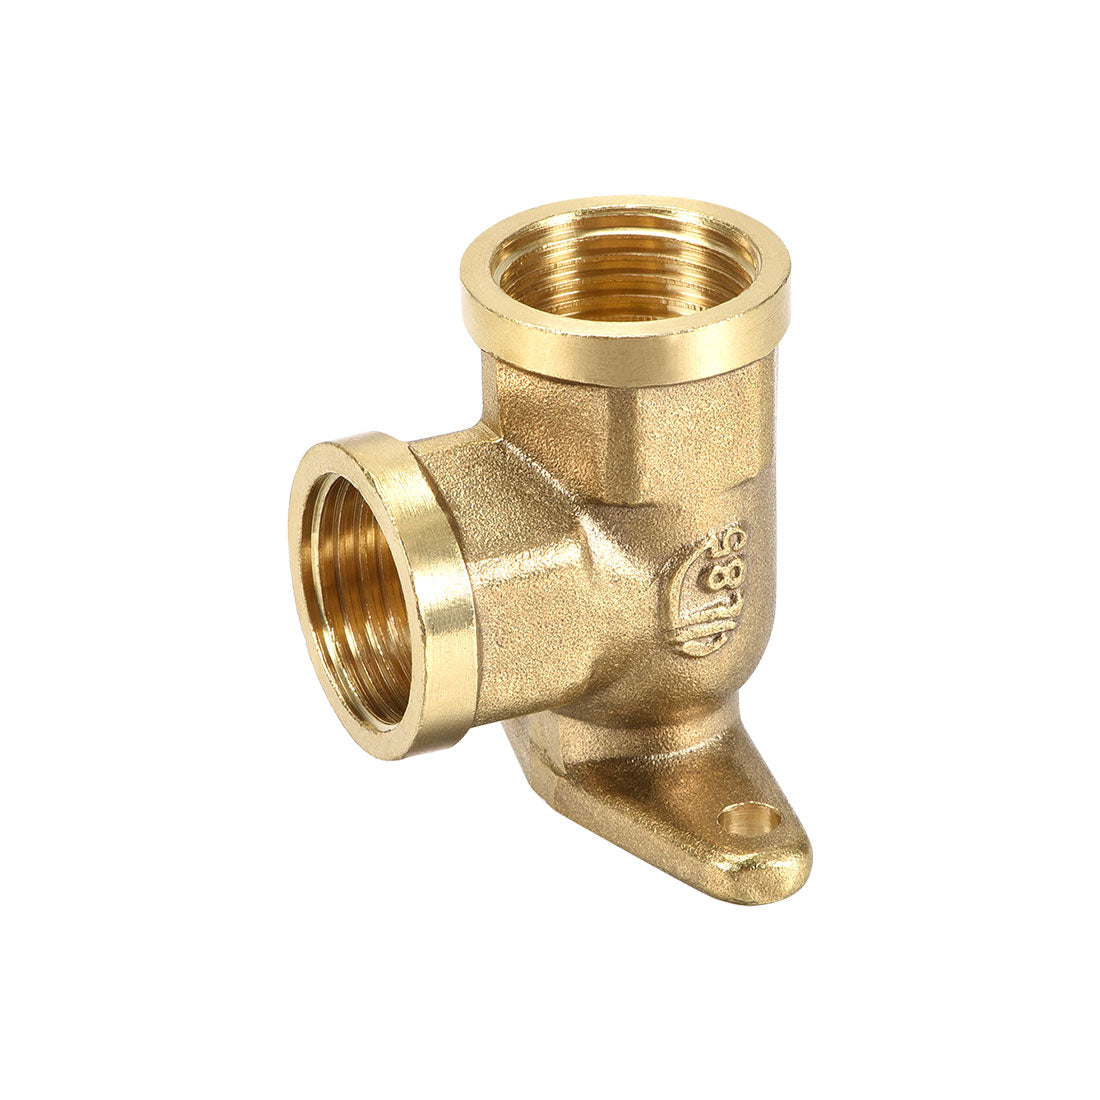 uxcell Uxcell Brass Pipe Fitting 90 Degree Drop Ear Elbow G1/2 Female x G1/2 Female Crimp Fitting